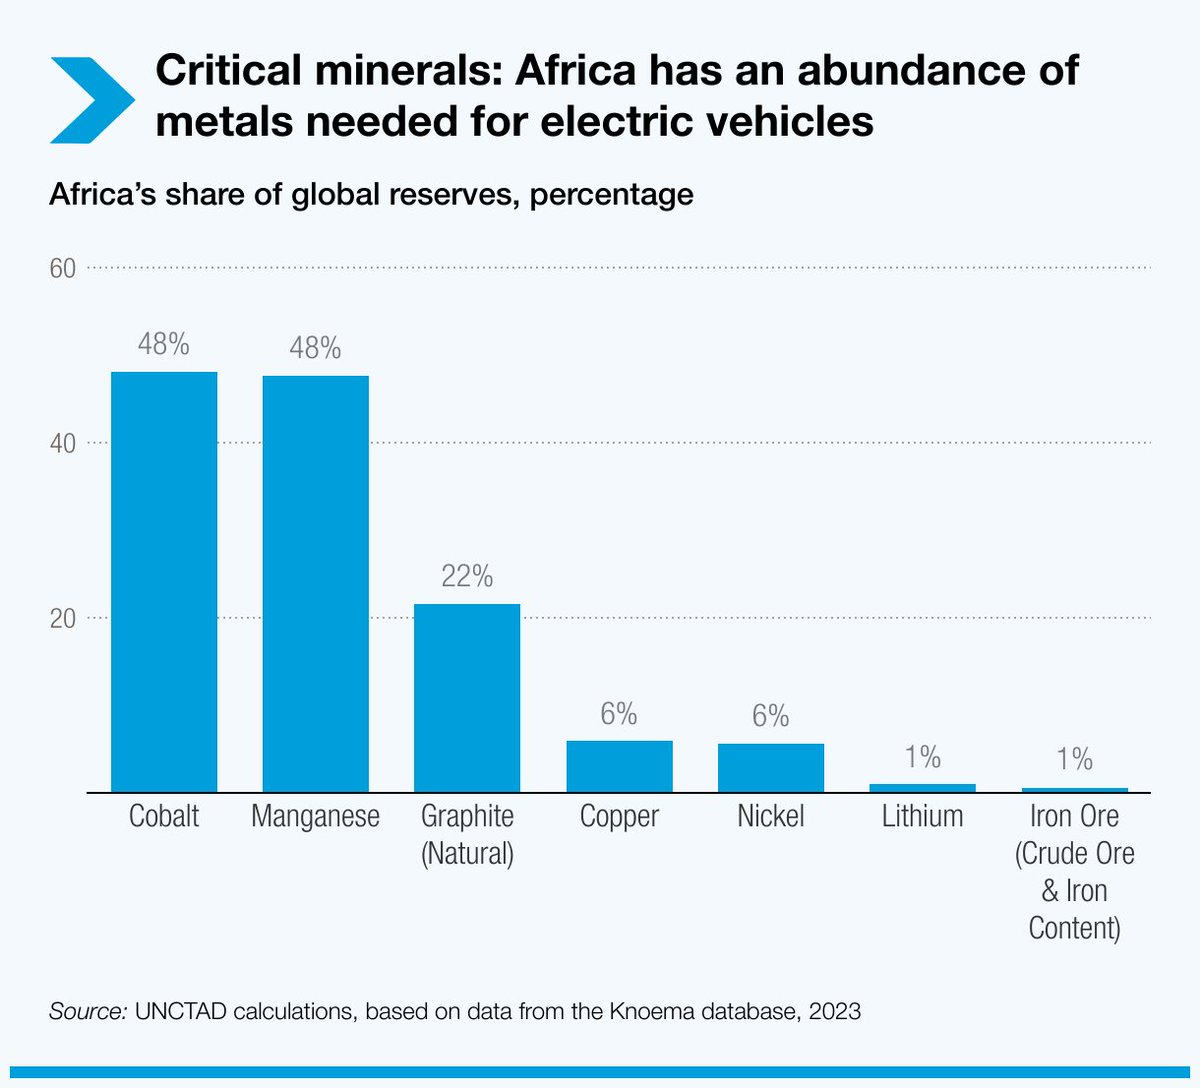 The surge in demand for critical minerals poses risks & opportunities for Africa. Dive deeper on 4 June as our 60th anniversary event in Addis Ababa & online explores Africa's path to harnessing its mineral wealth sustainably. 𝐌𝐨𝐫𝐞: bit.ly/4a8swqo